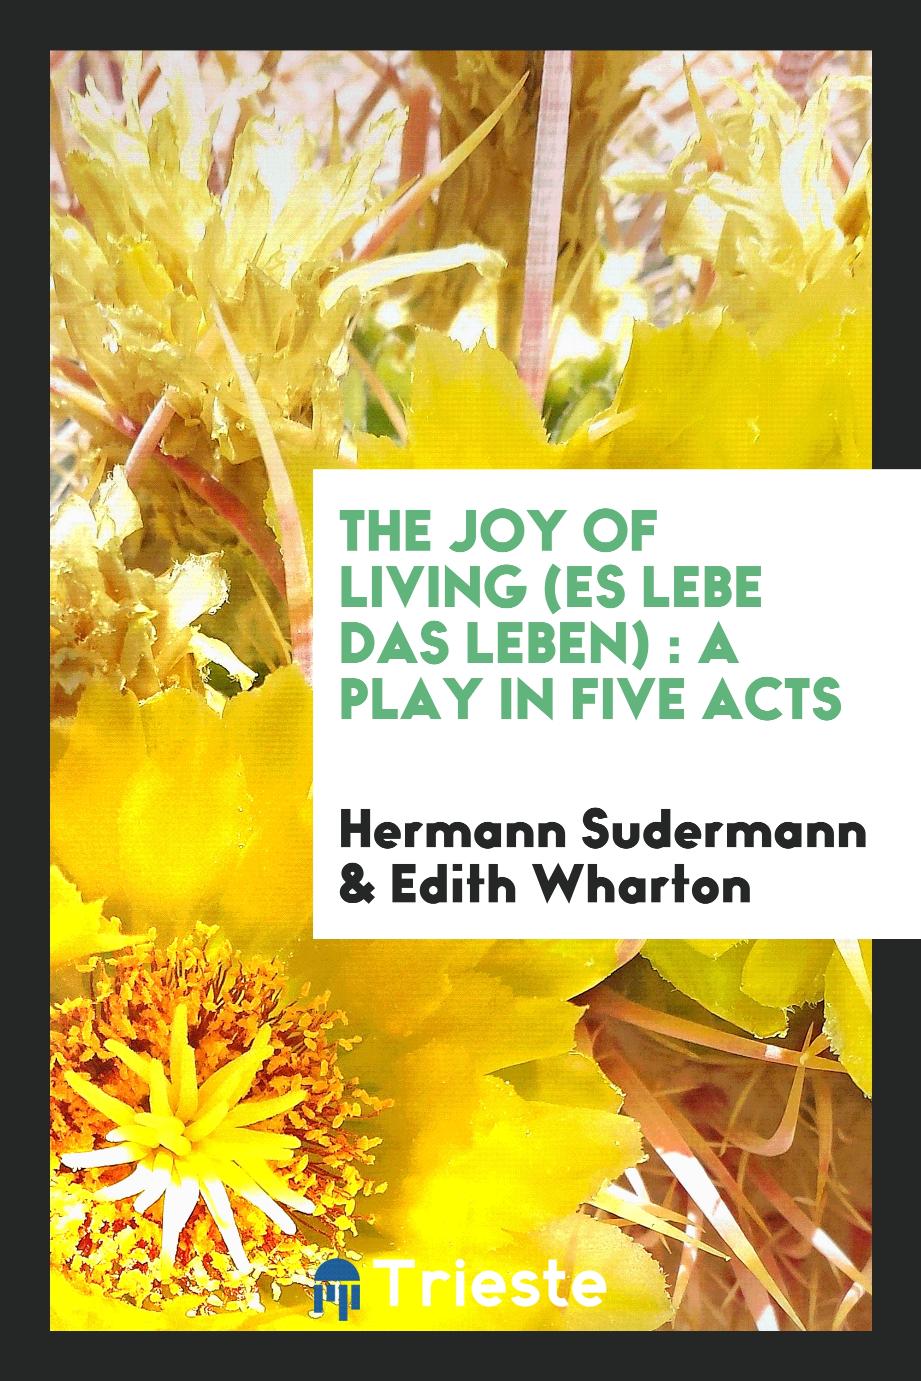 The joy of living (Es Lebe das Leben) : a play in five acts